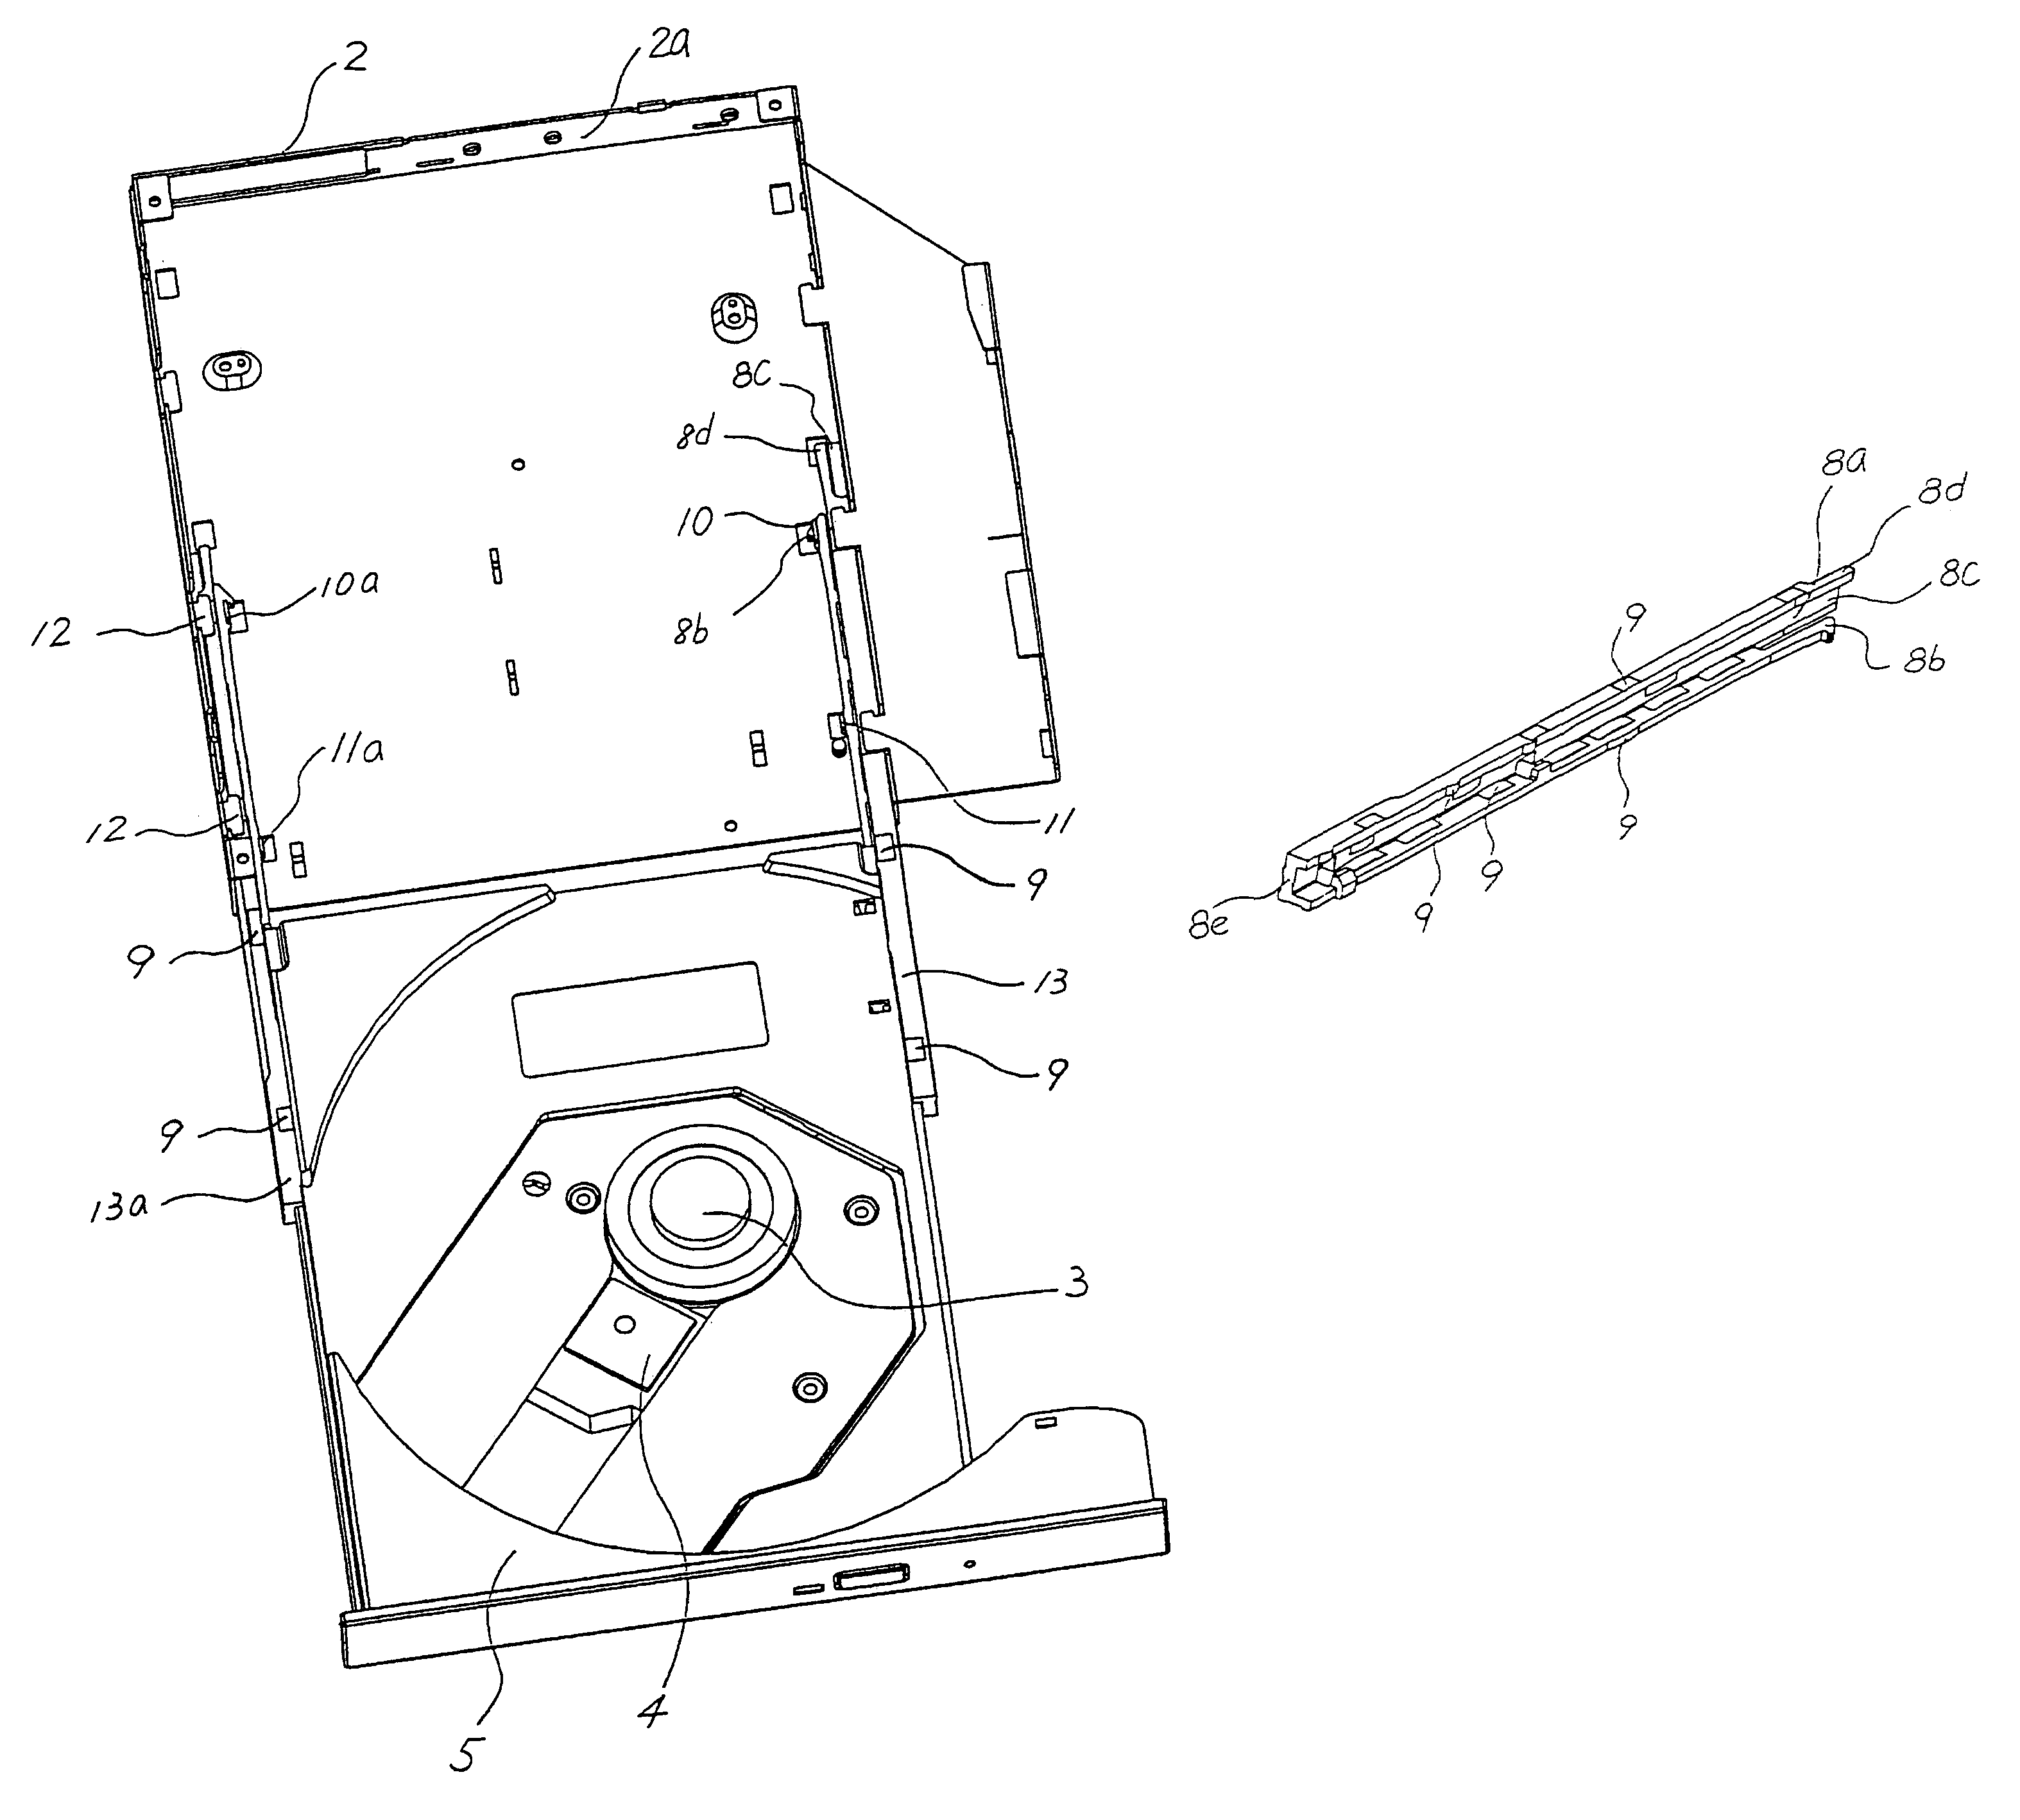 Sliding mechanism for optical compact disk drive